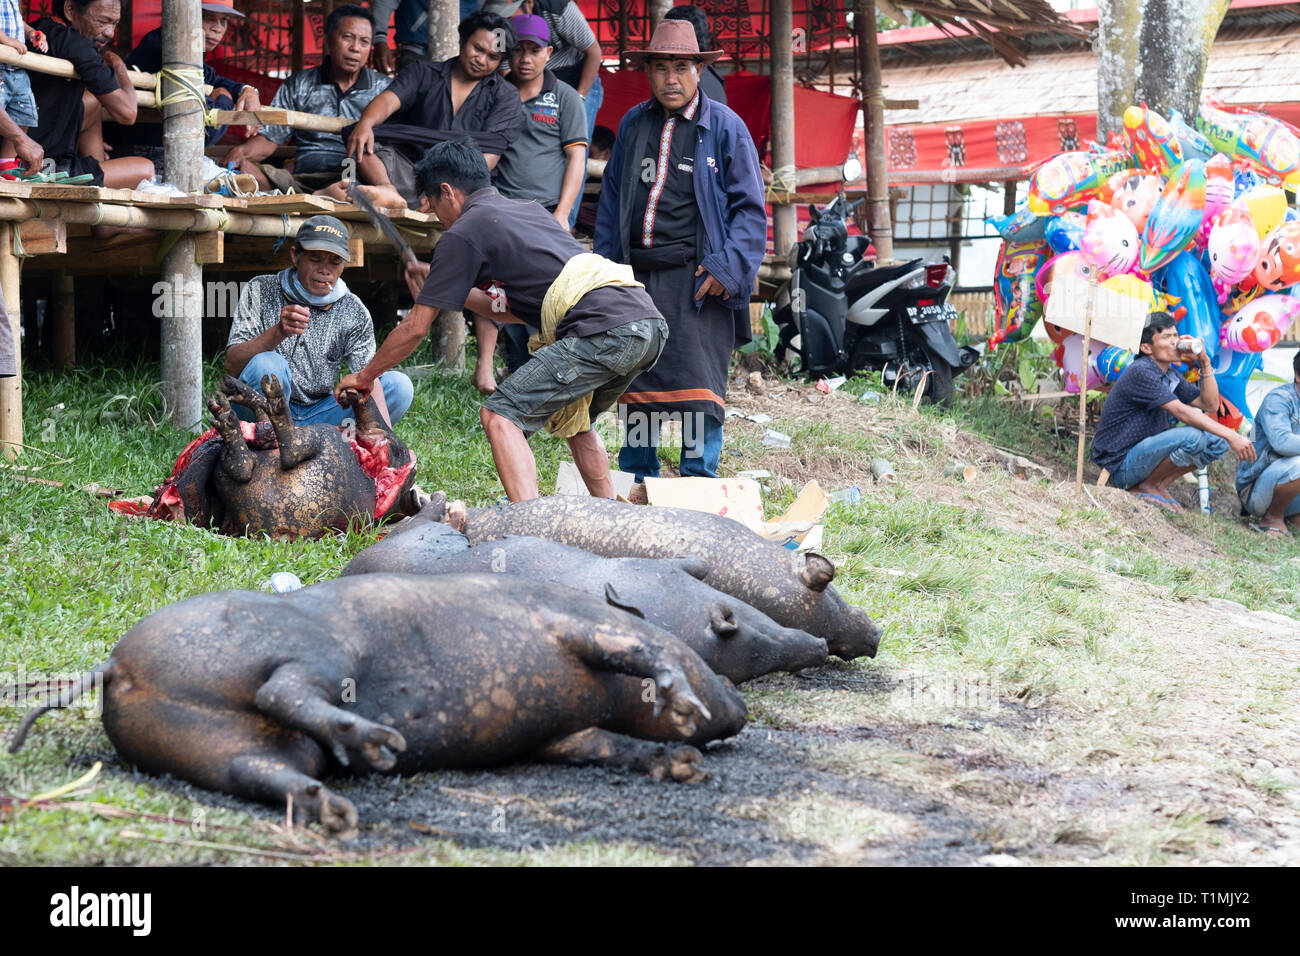 Pigs being slaughtered at a traditional Torajan funeral, Sulawesi, Indonesia Stock Photo